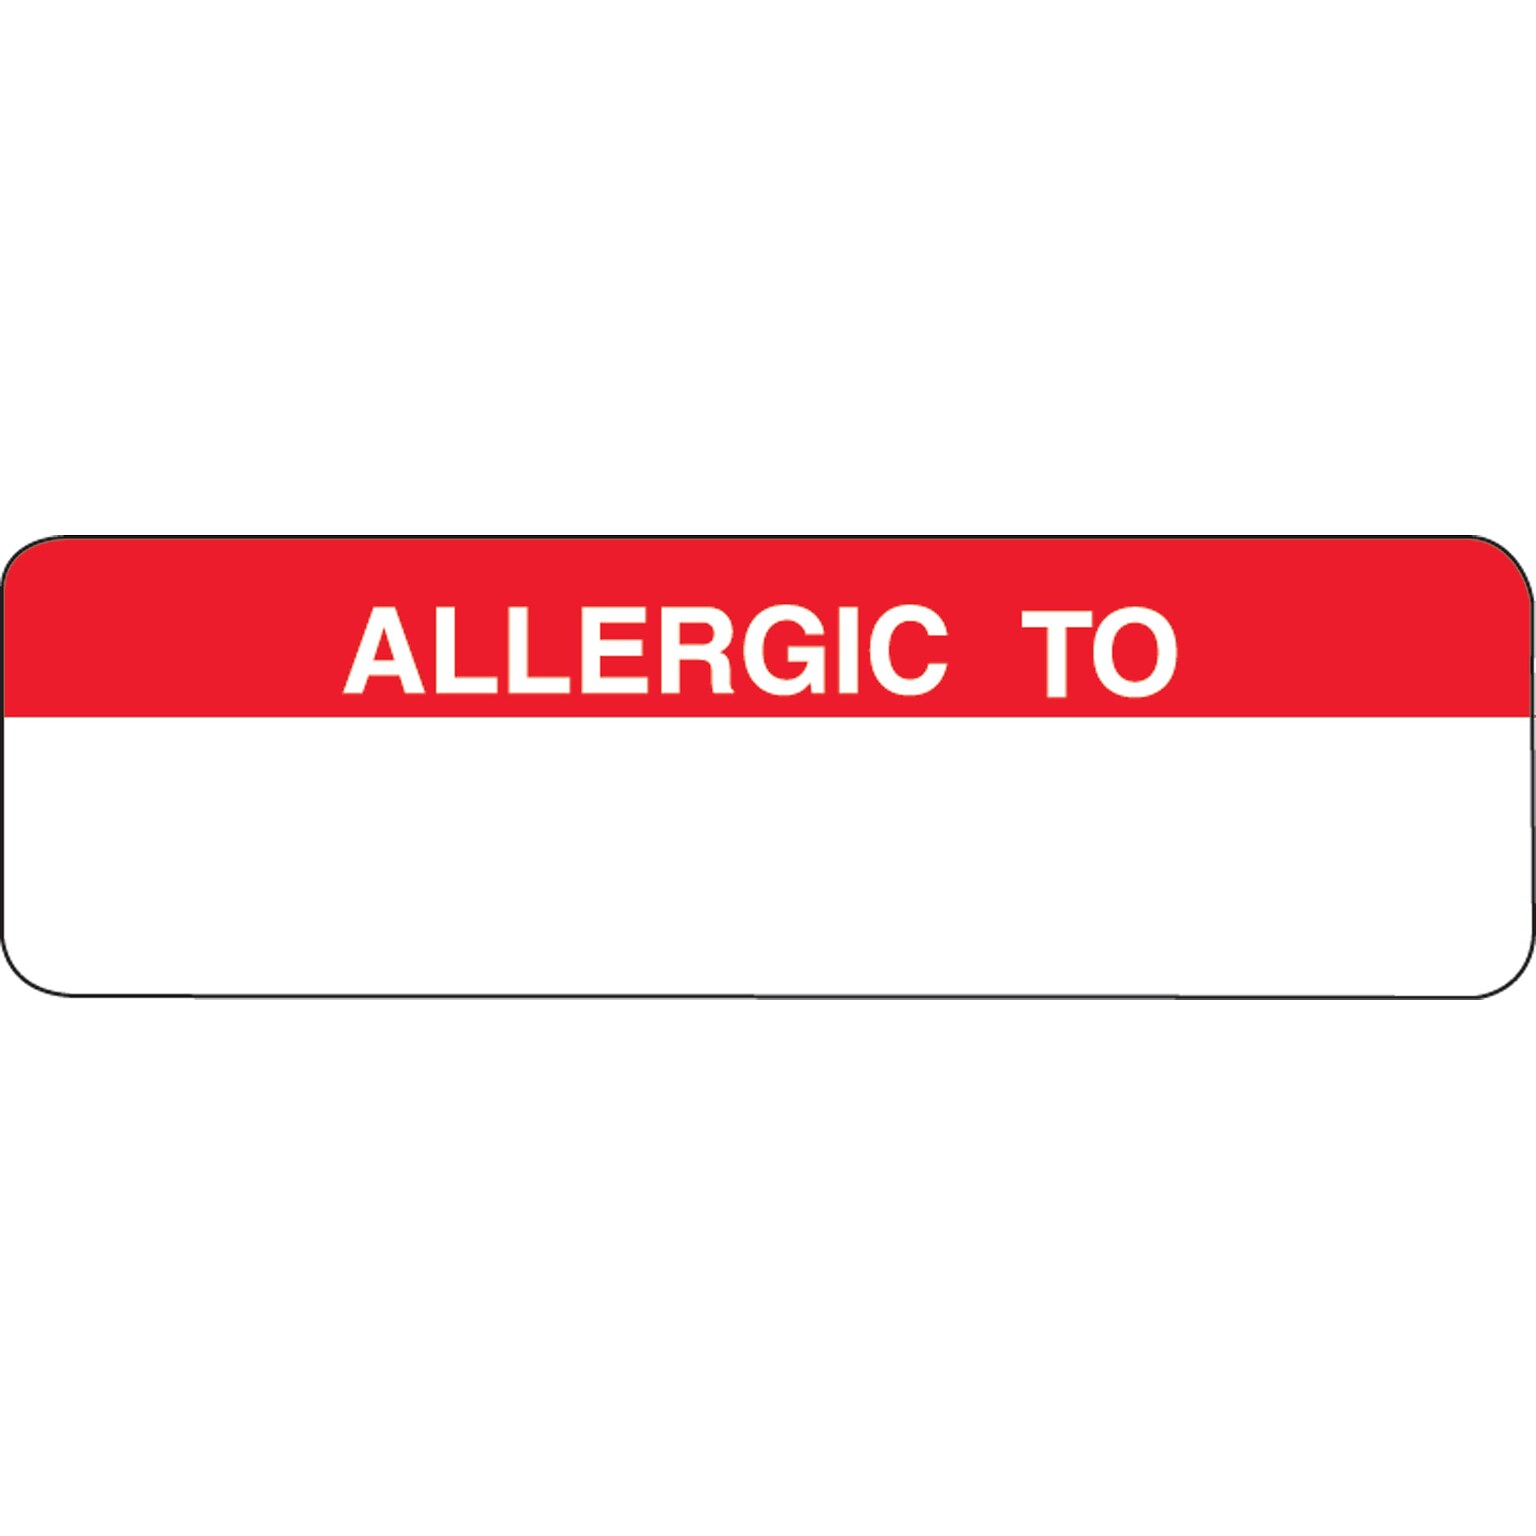 Medical Arts Press® Allergy Warning Medical Labels, Allergic To, Red and White, 3/4x2-1/2, 300 Labels